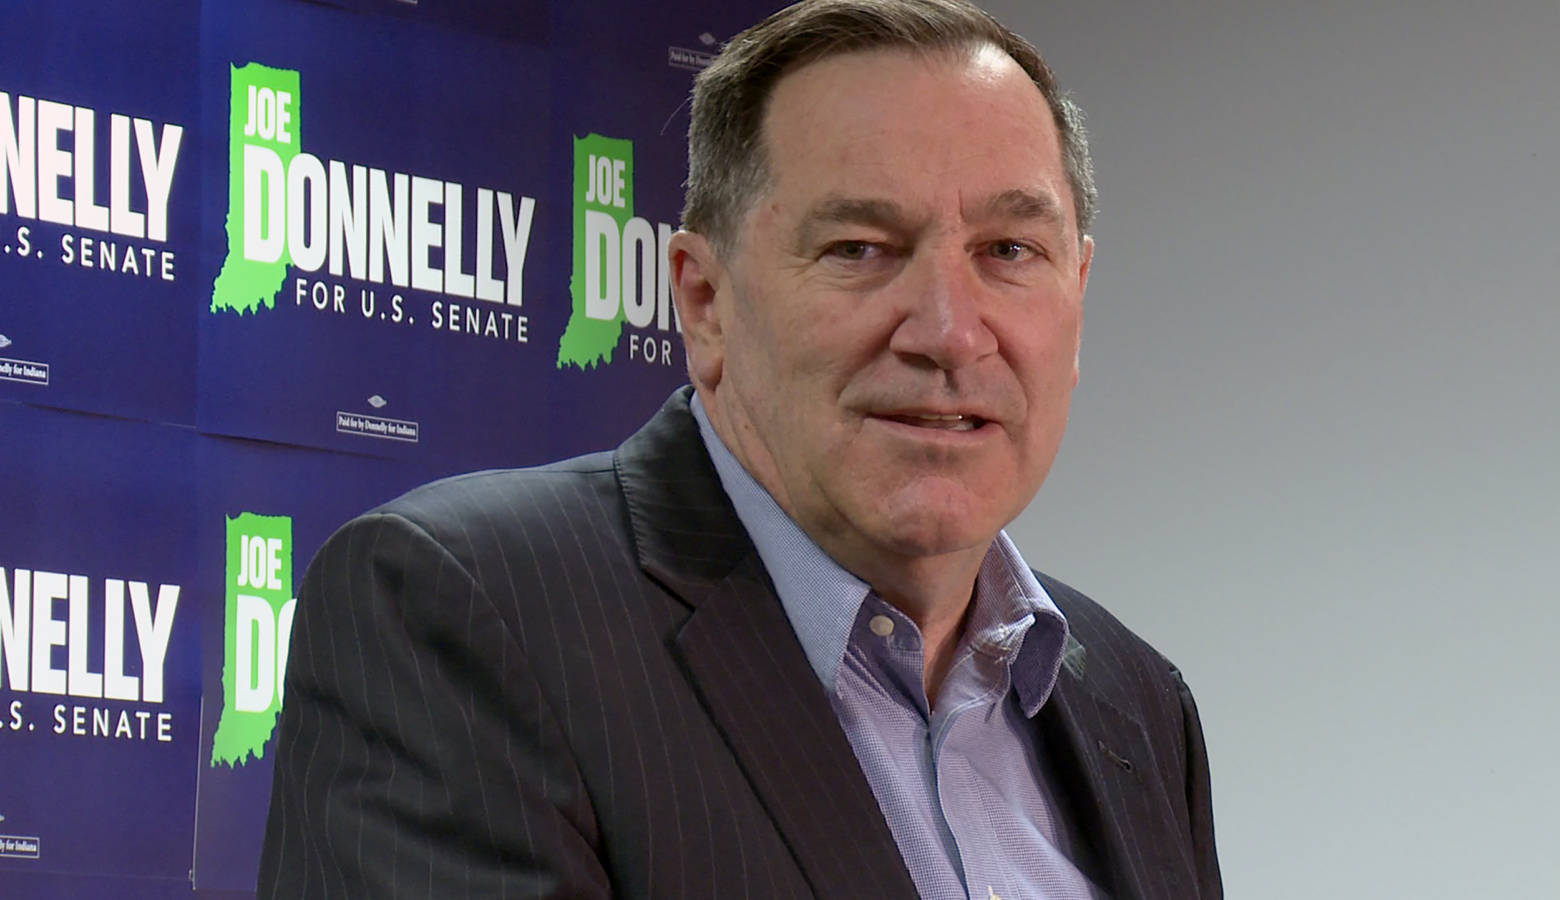 Sen. Joe Donnelly (D-Ind.) says he has “deep reservations” about President Trump’s Supreme Court nominee Brett Kavanaugh and will vote against him. (Lauren Chapman/IPB News)